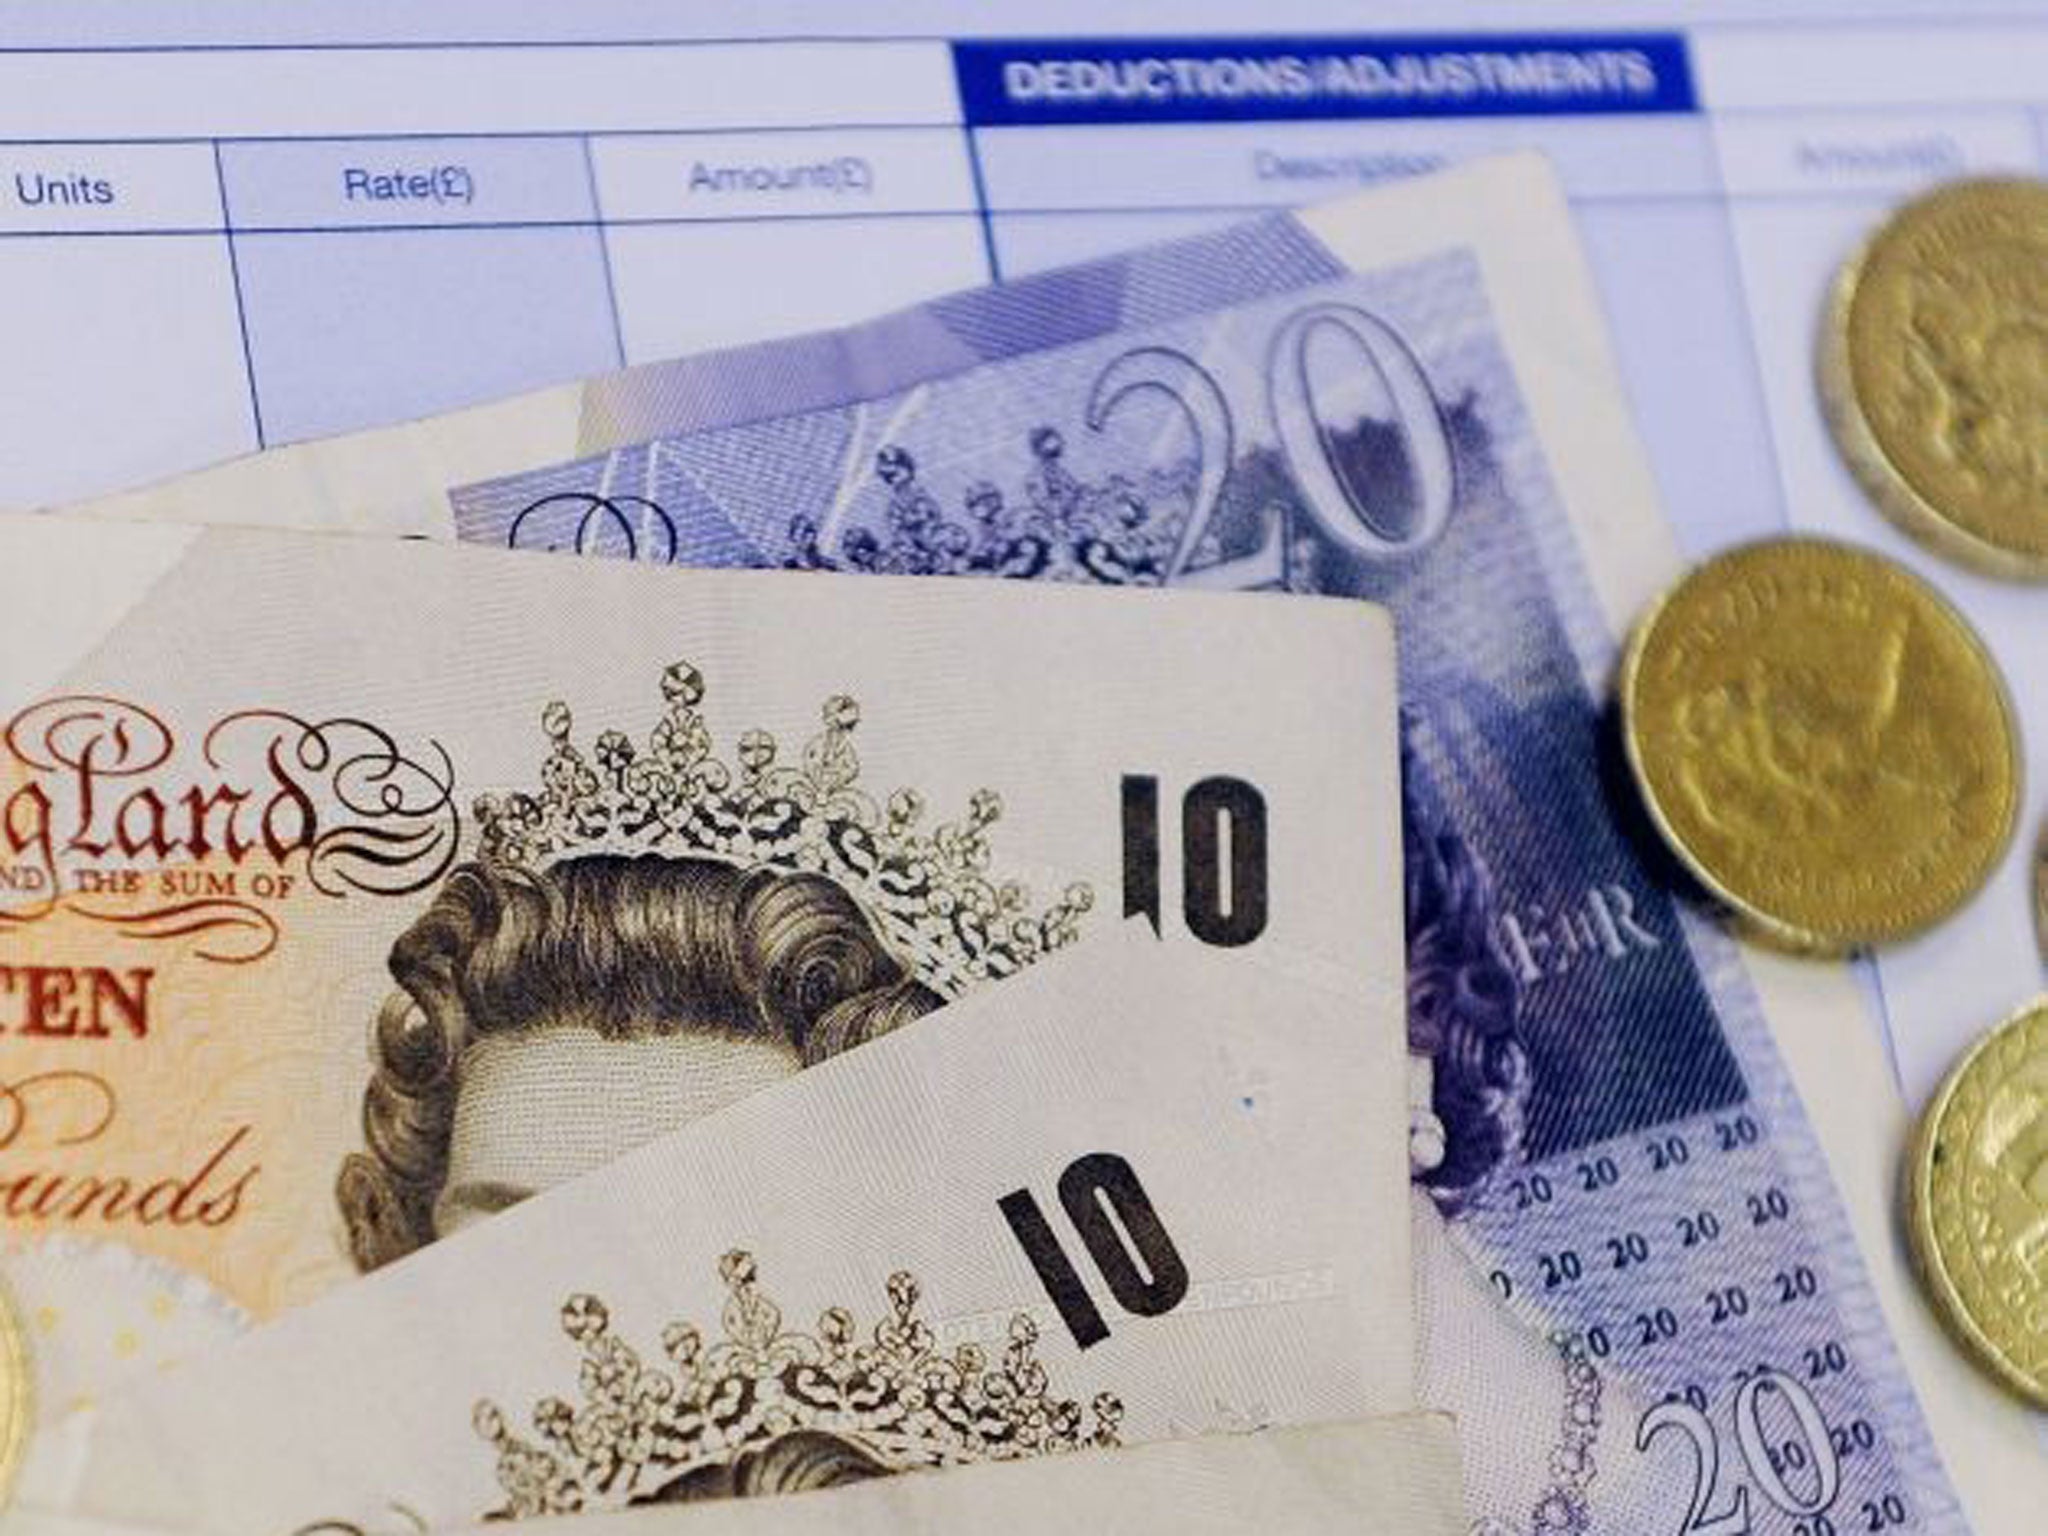 The national minimum wage is set to rise by 3 per cent from £6.50 to £6.70 an hour in October